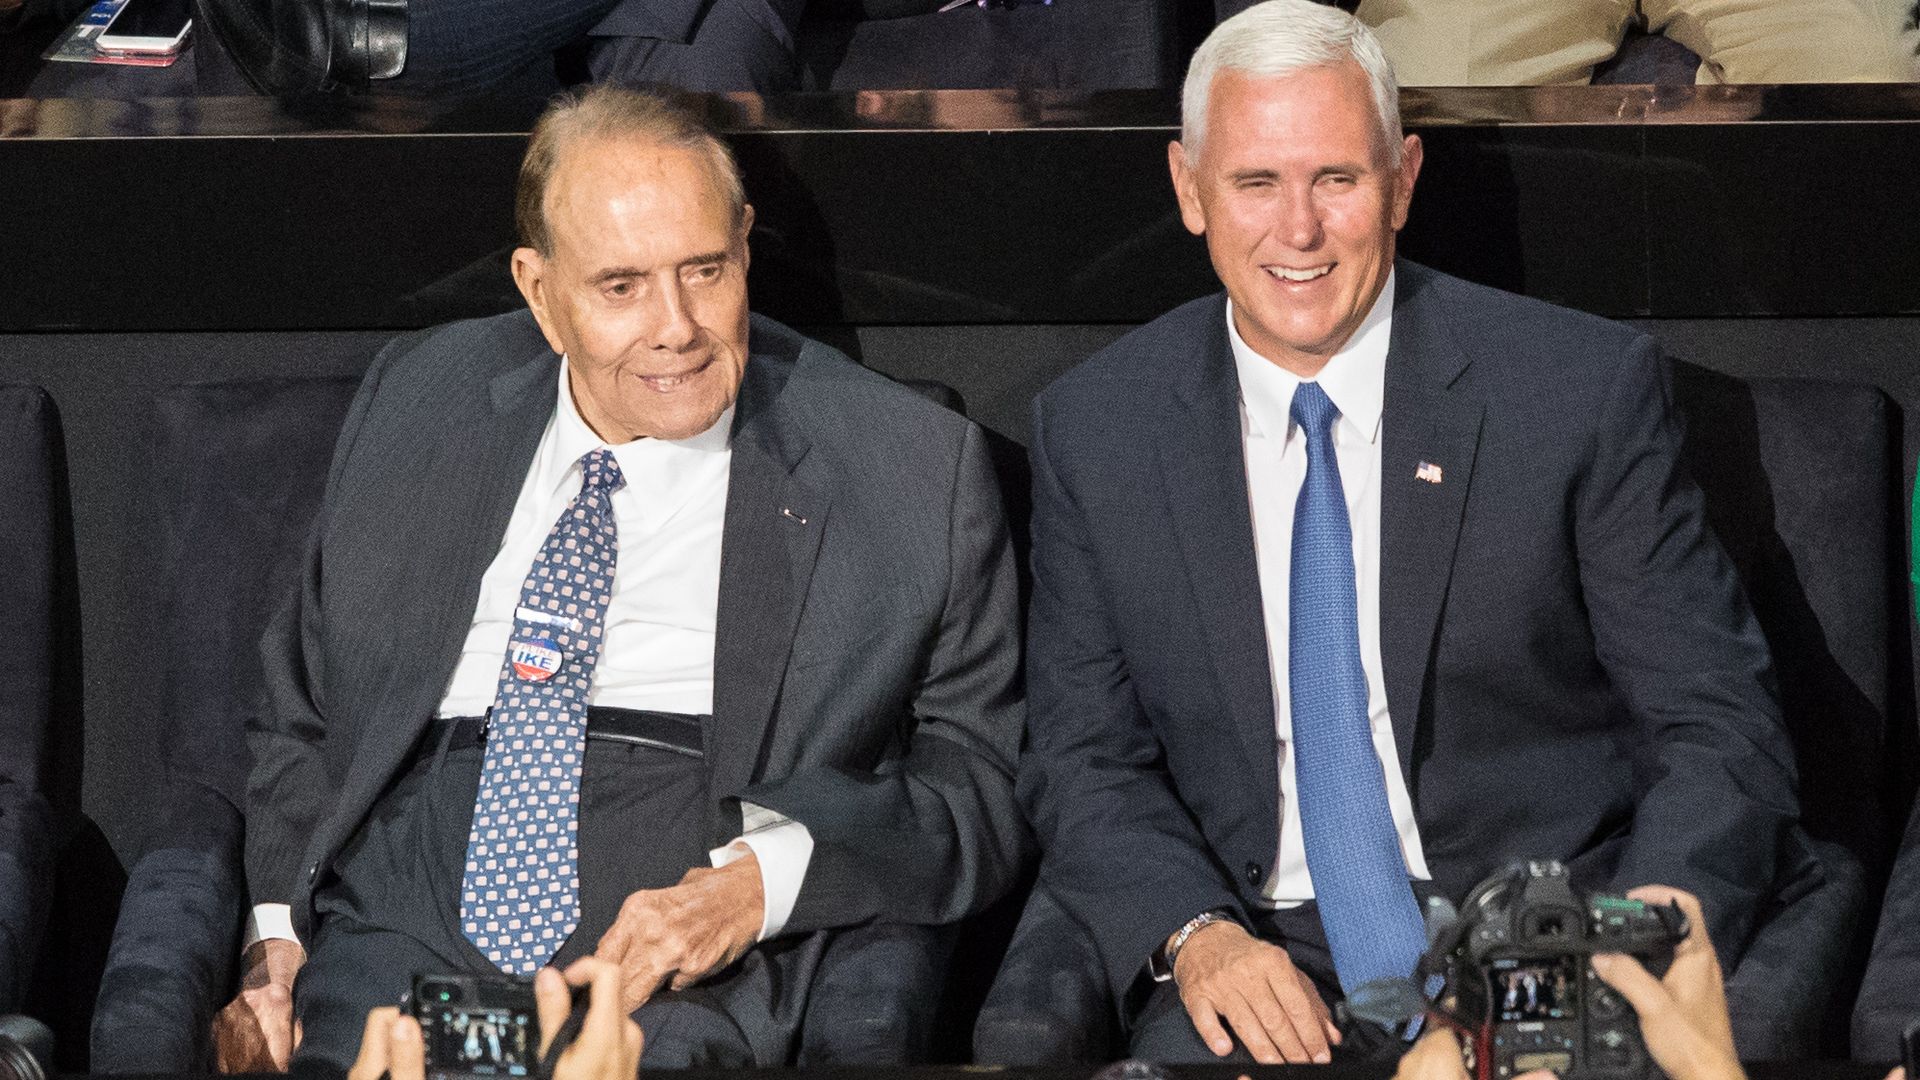 Former Senator Bob Dole sits next to Mike Pence at the 2016 Republican National Convention.